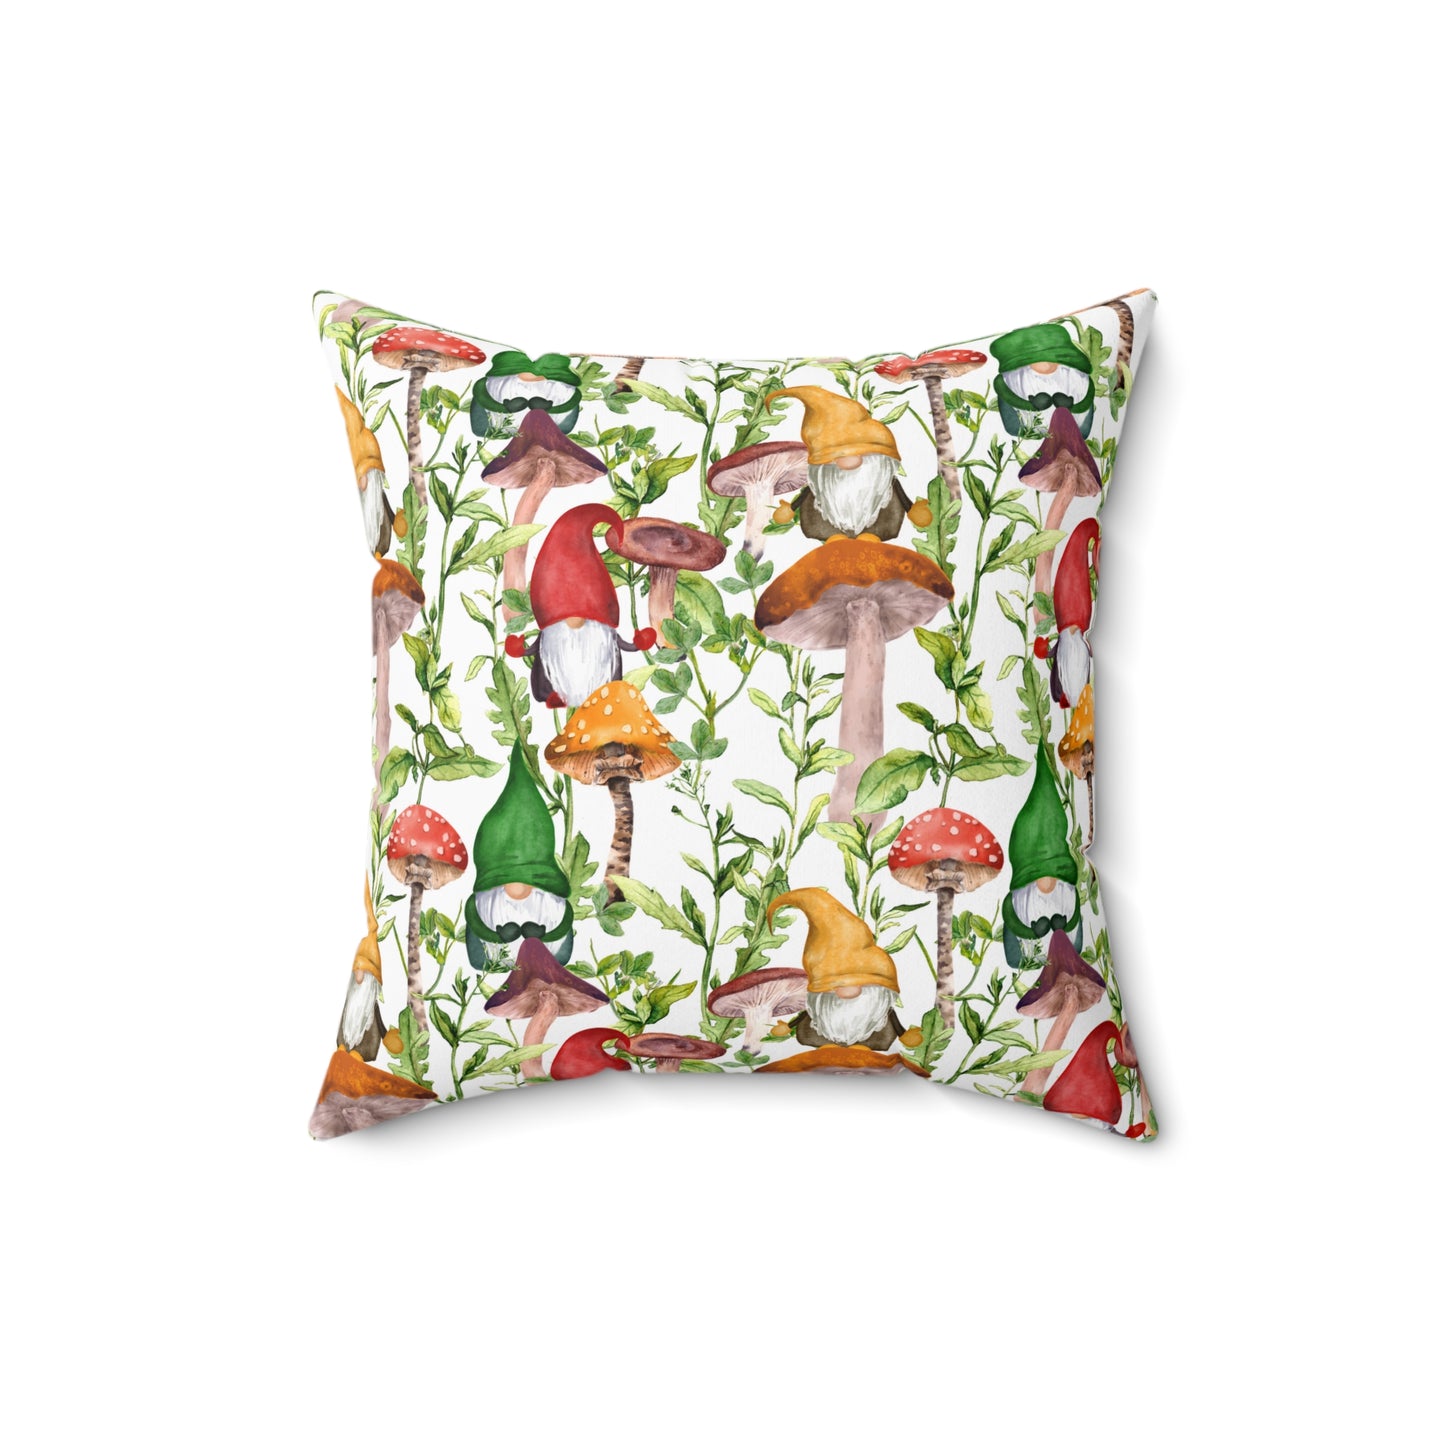 Gnomes and Mushrooms Spun Polyester Square Pillow